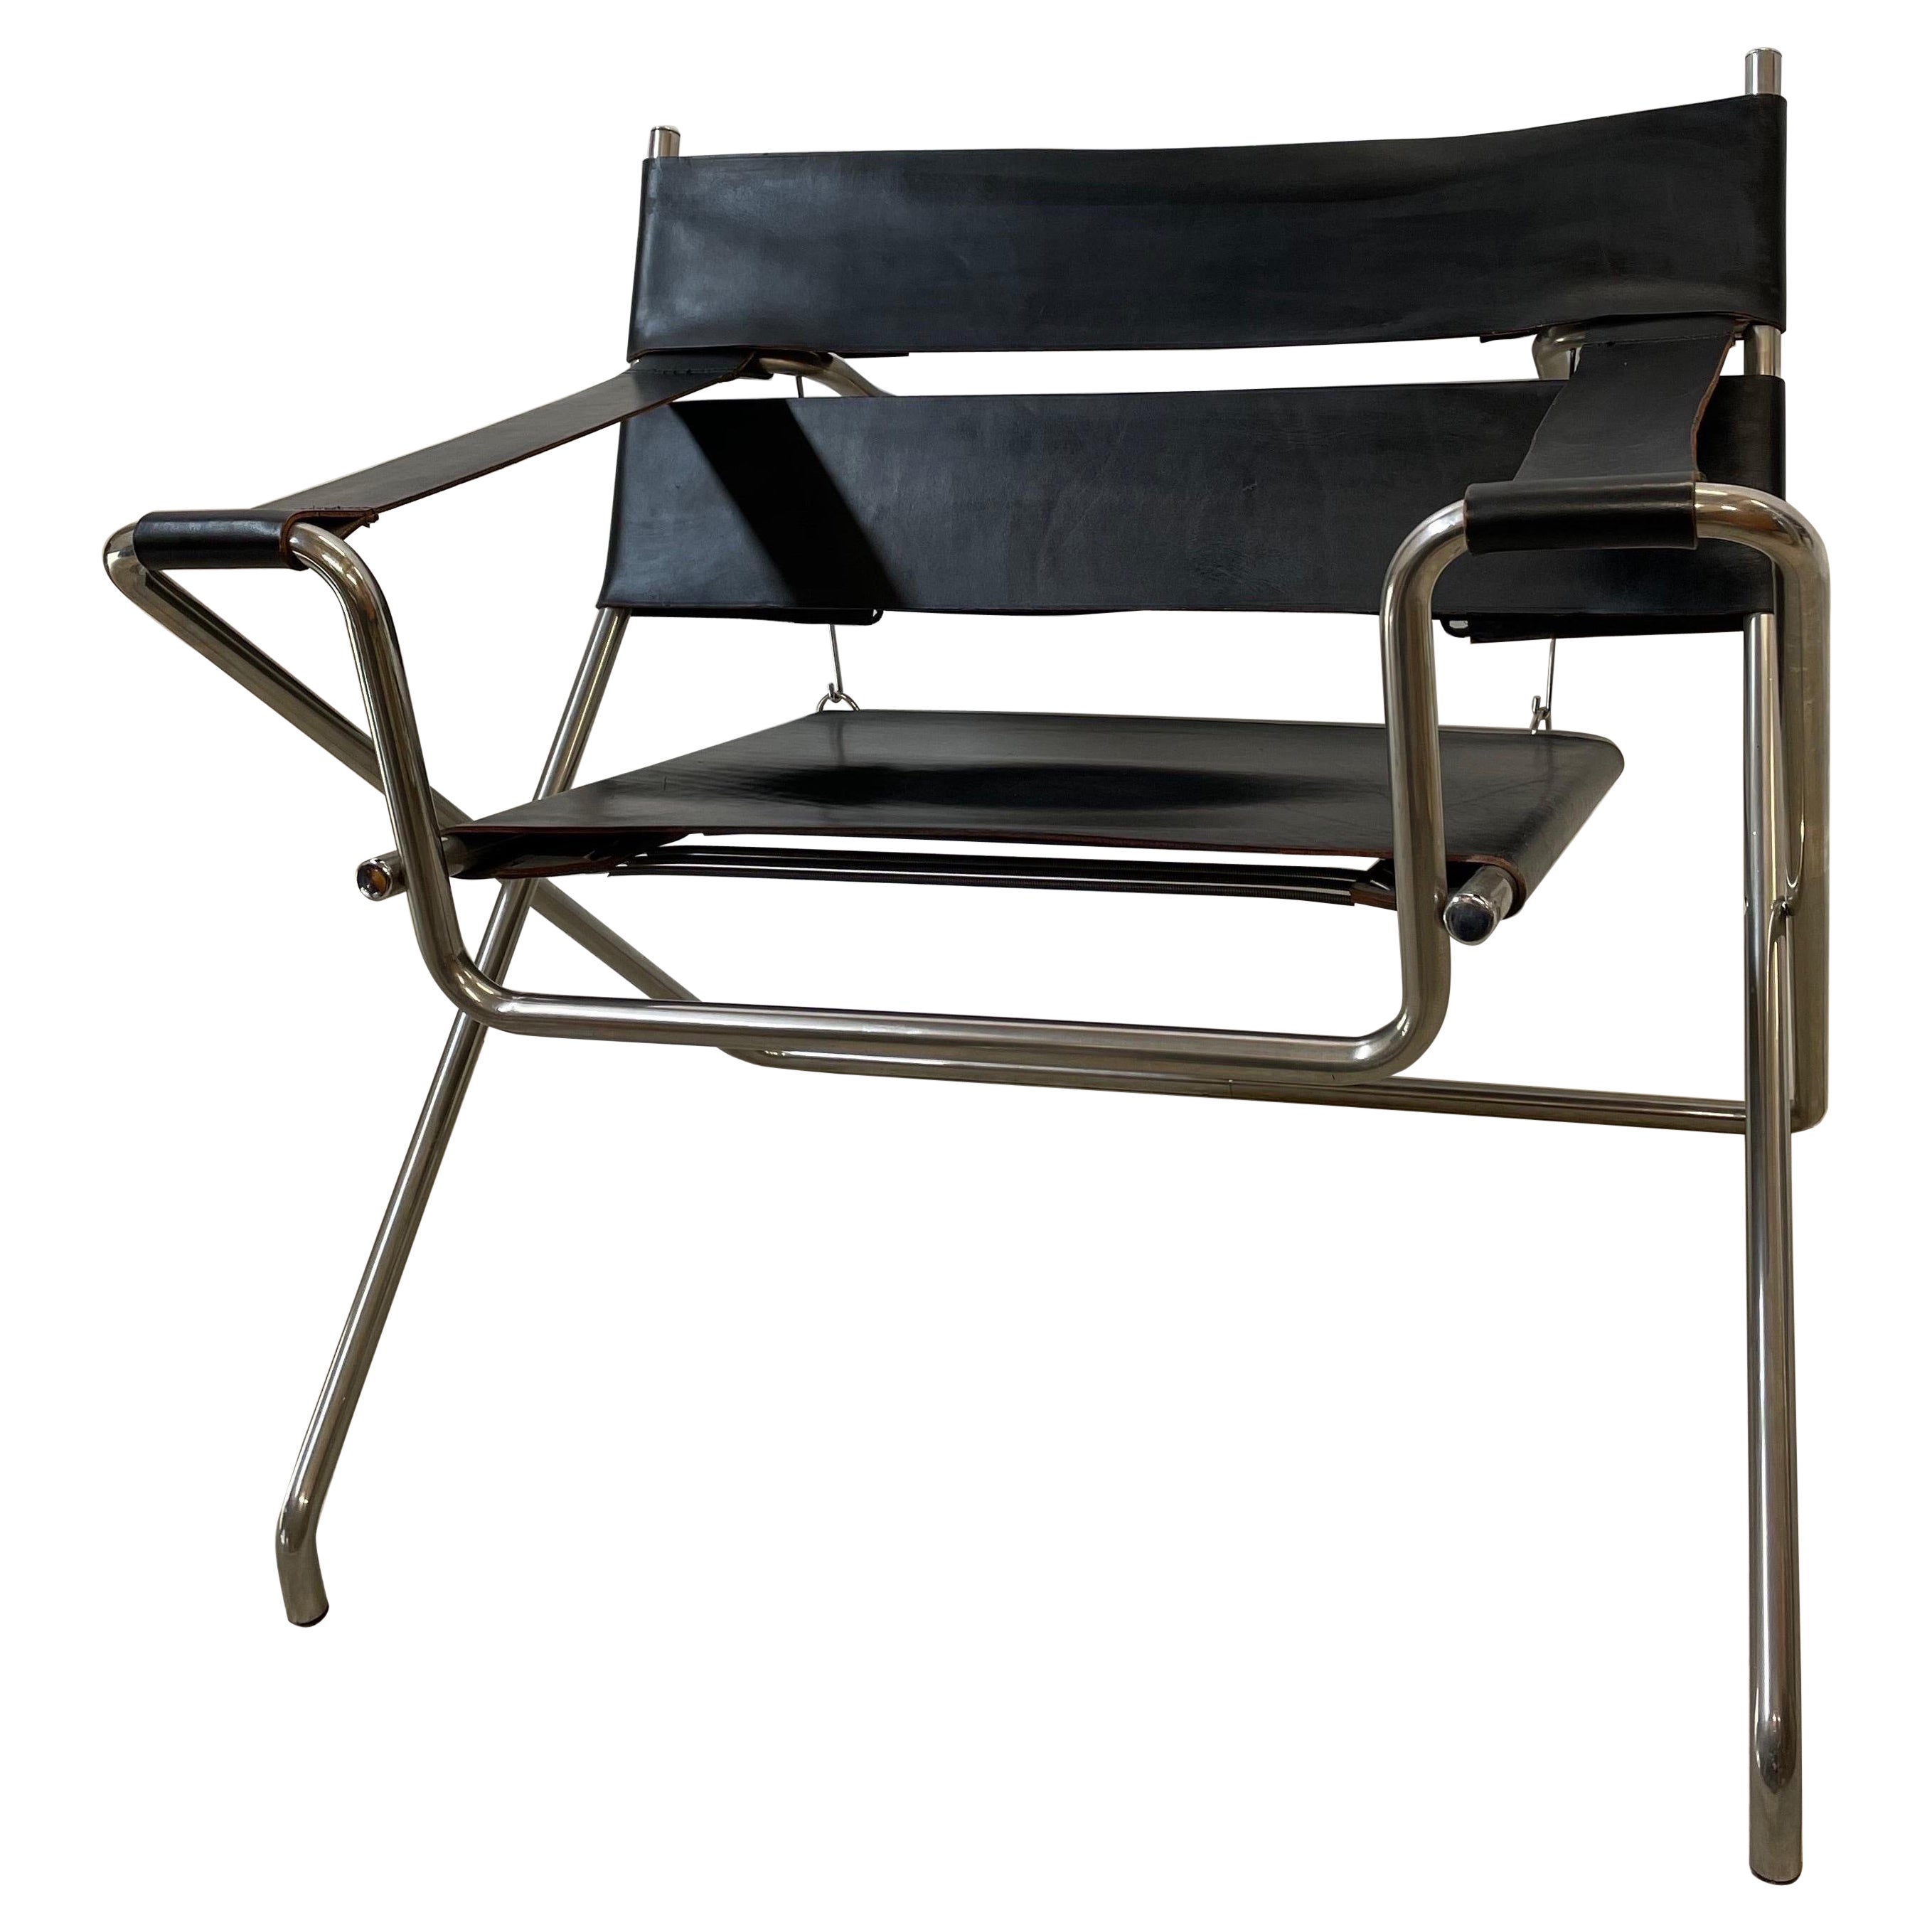 D4 Foldingchair by Marcel Breuer for Tecta in Black Leather -1980 For Sale